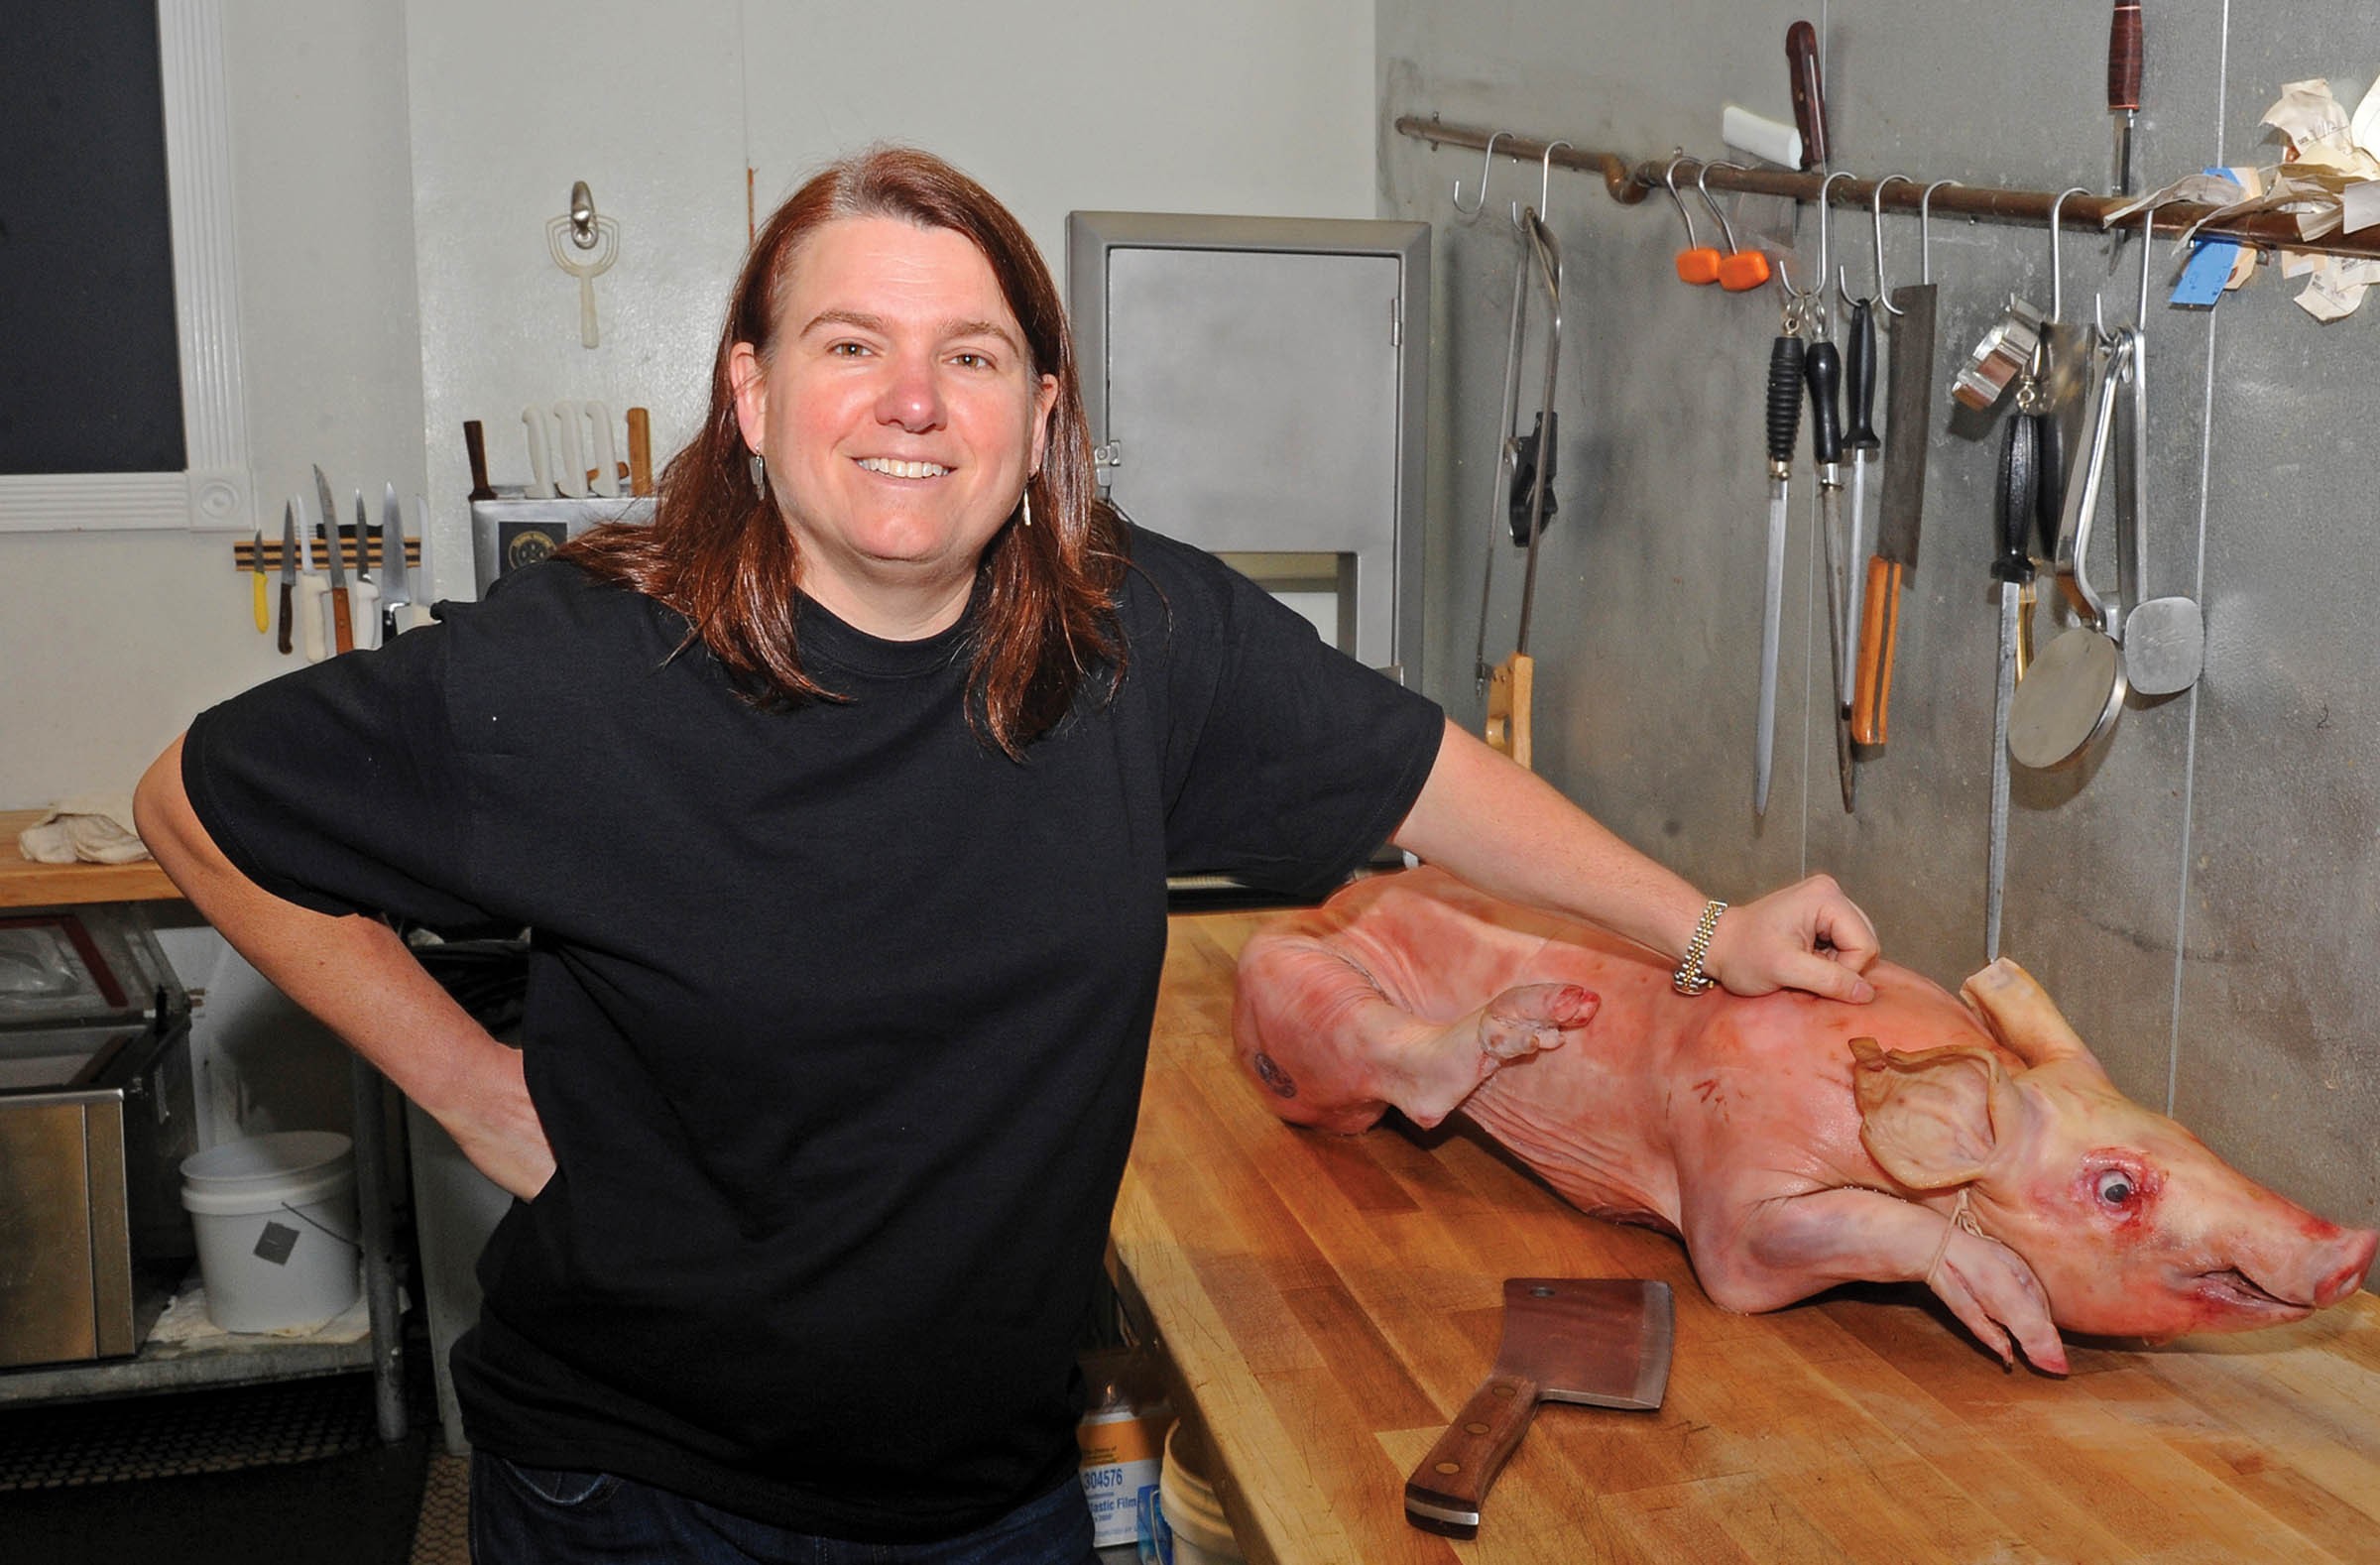 Belmont Butchery owner Tanya Cauthen and sponsors cook up a carnivorous benefit for Scotchtown, Patrick Henry’s home in Hanover County, Oct.27. - SCOTT ELMQUIST